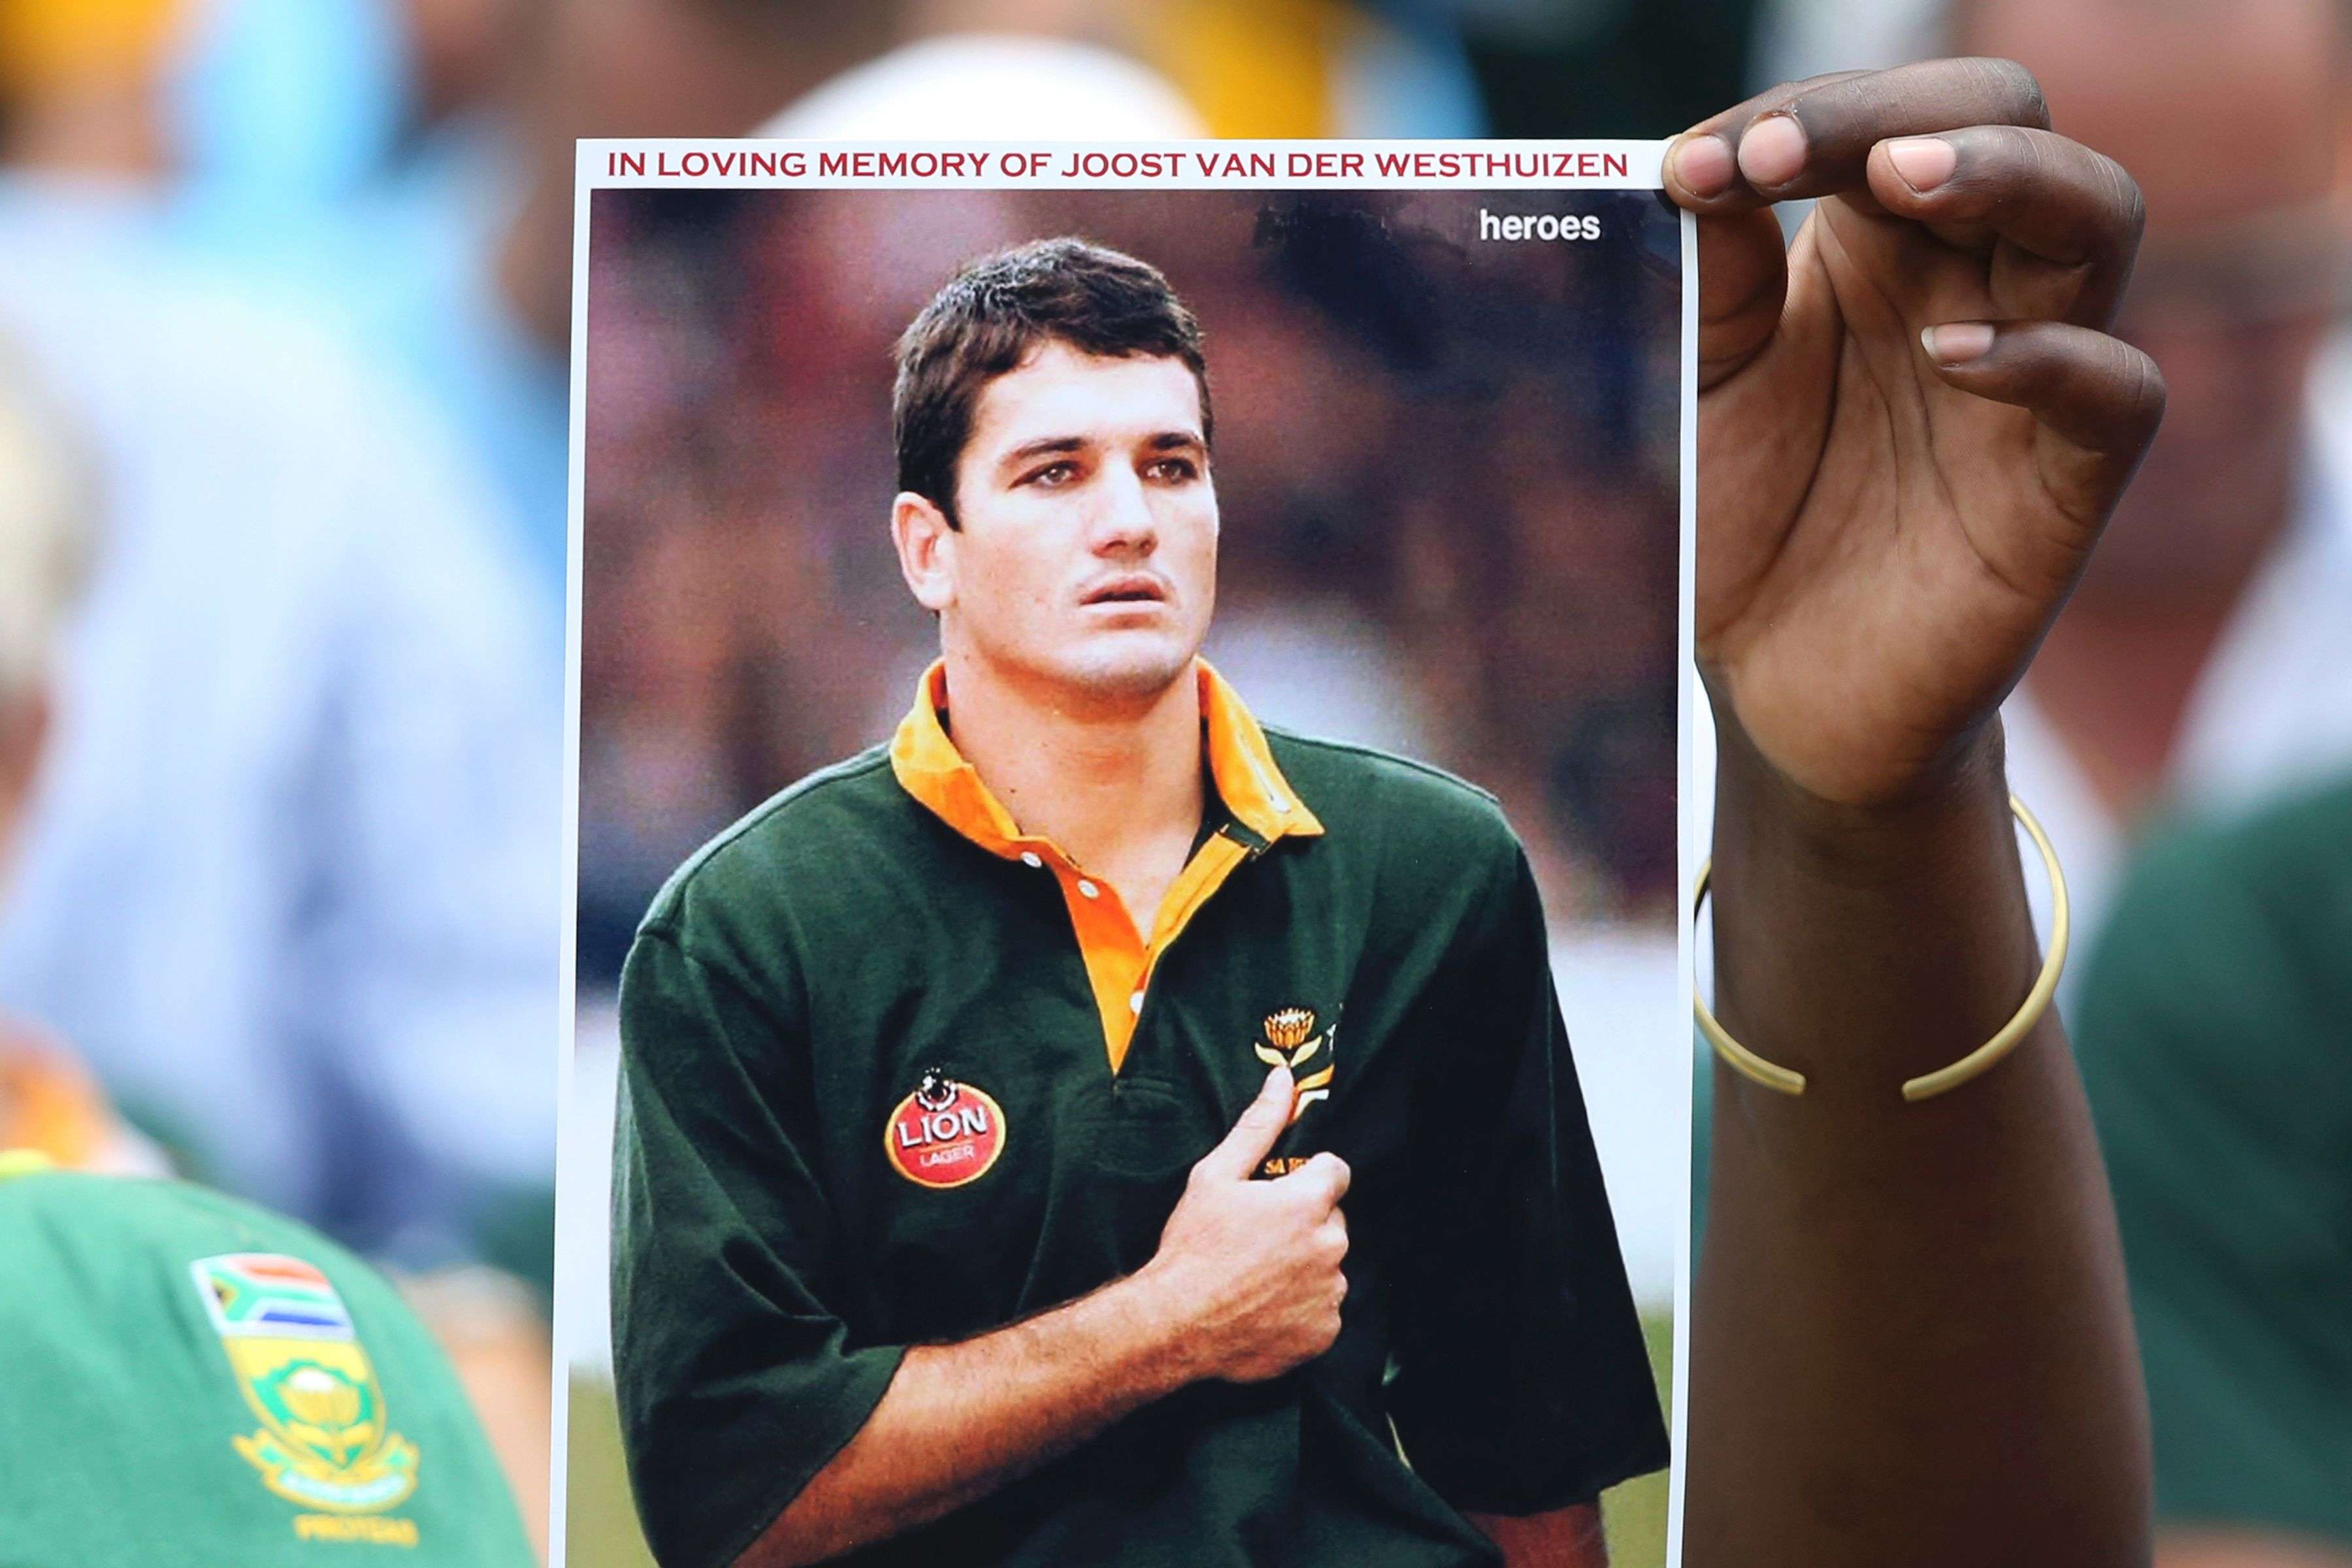 A portrait of Joost van der Westhuizen during a memorial service at Loftus rugby stadium in February. Photo: AFP